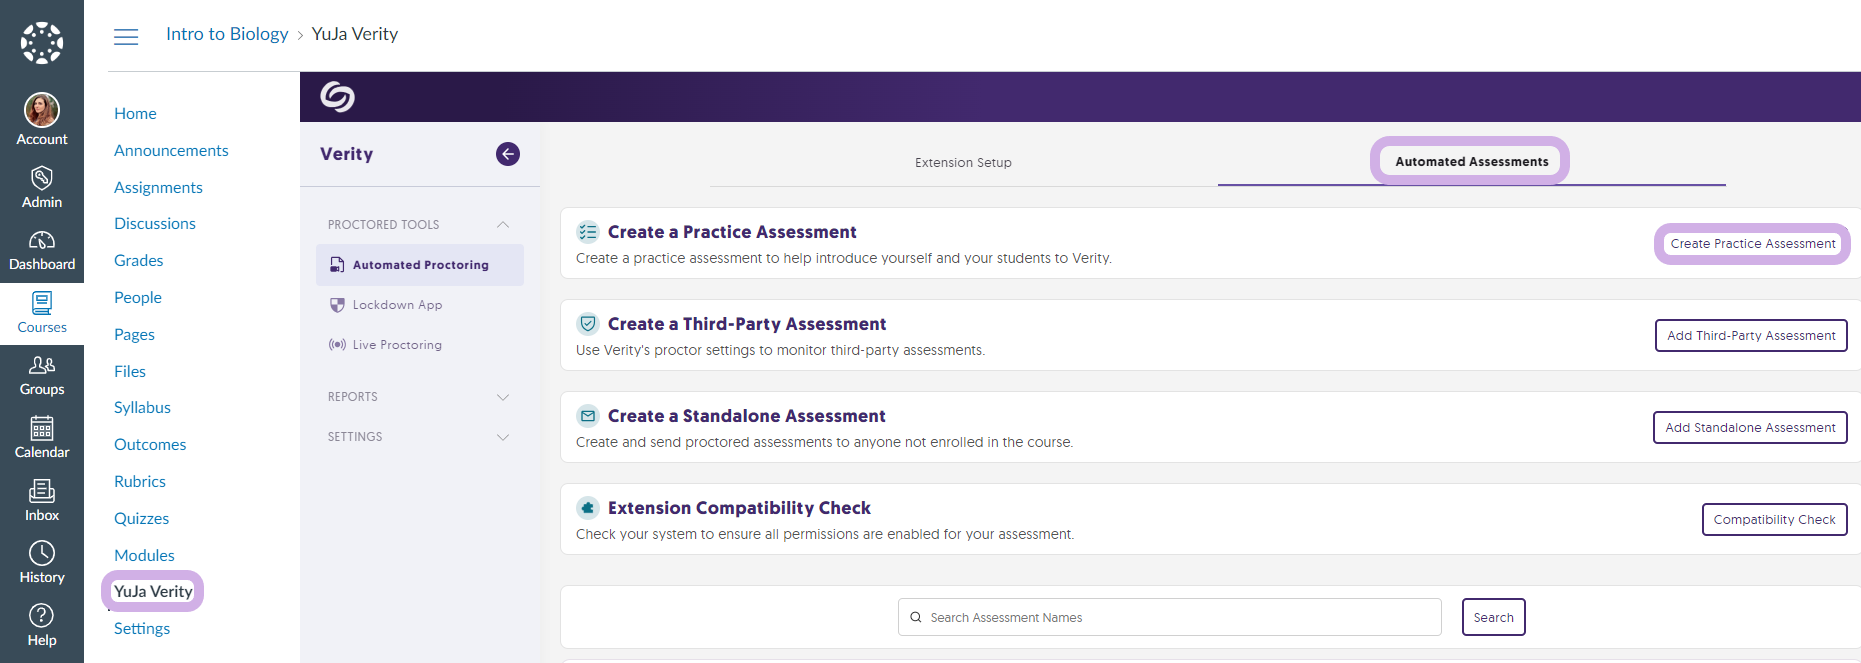 The YuJa Verity link is selected within a course and the Automated Assessments tab is selected.